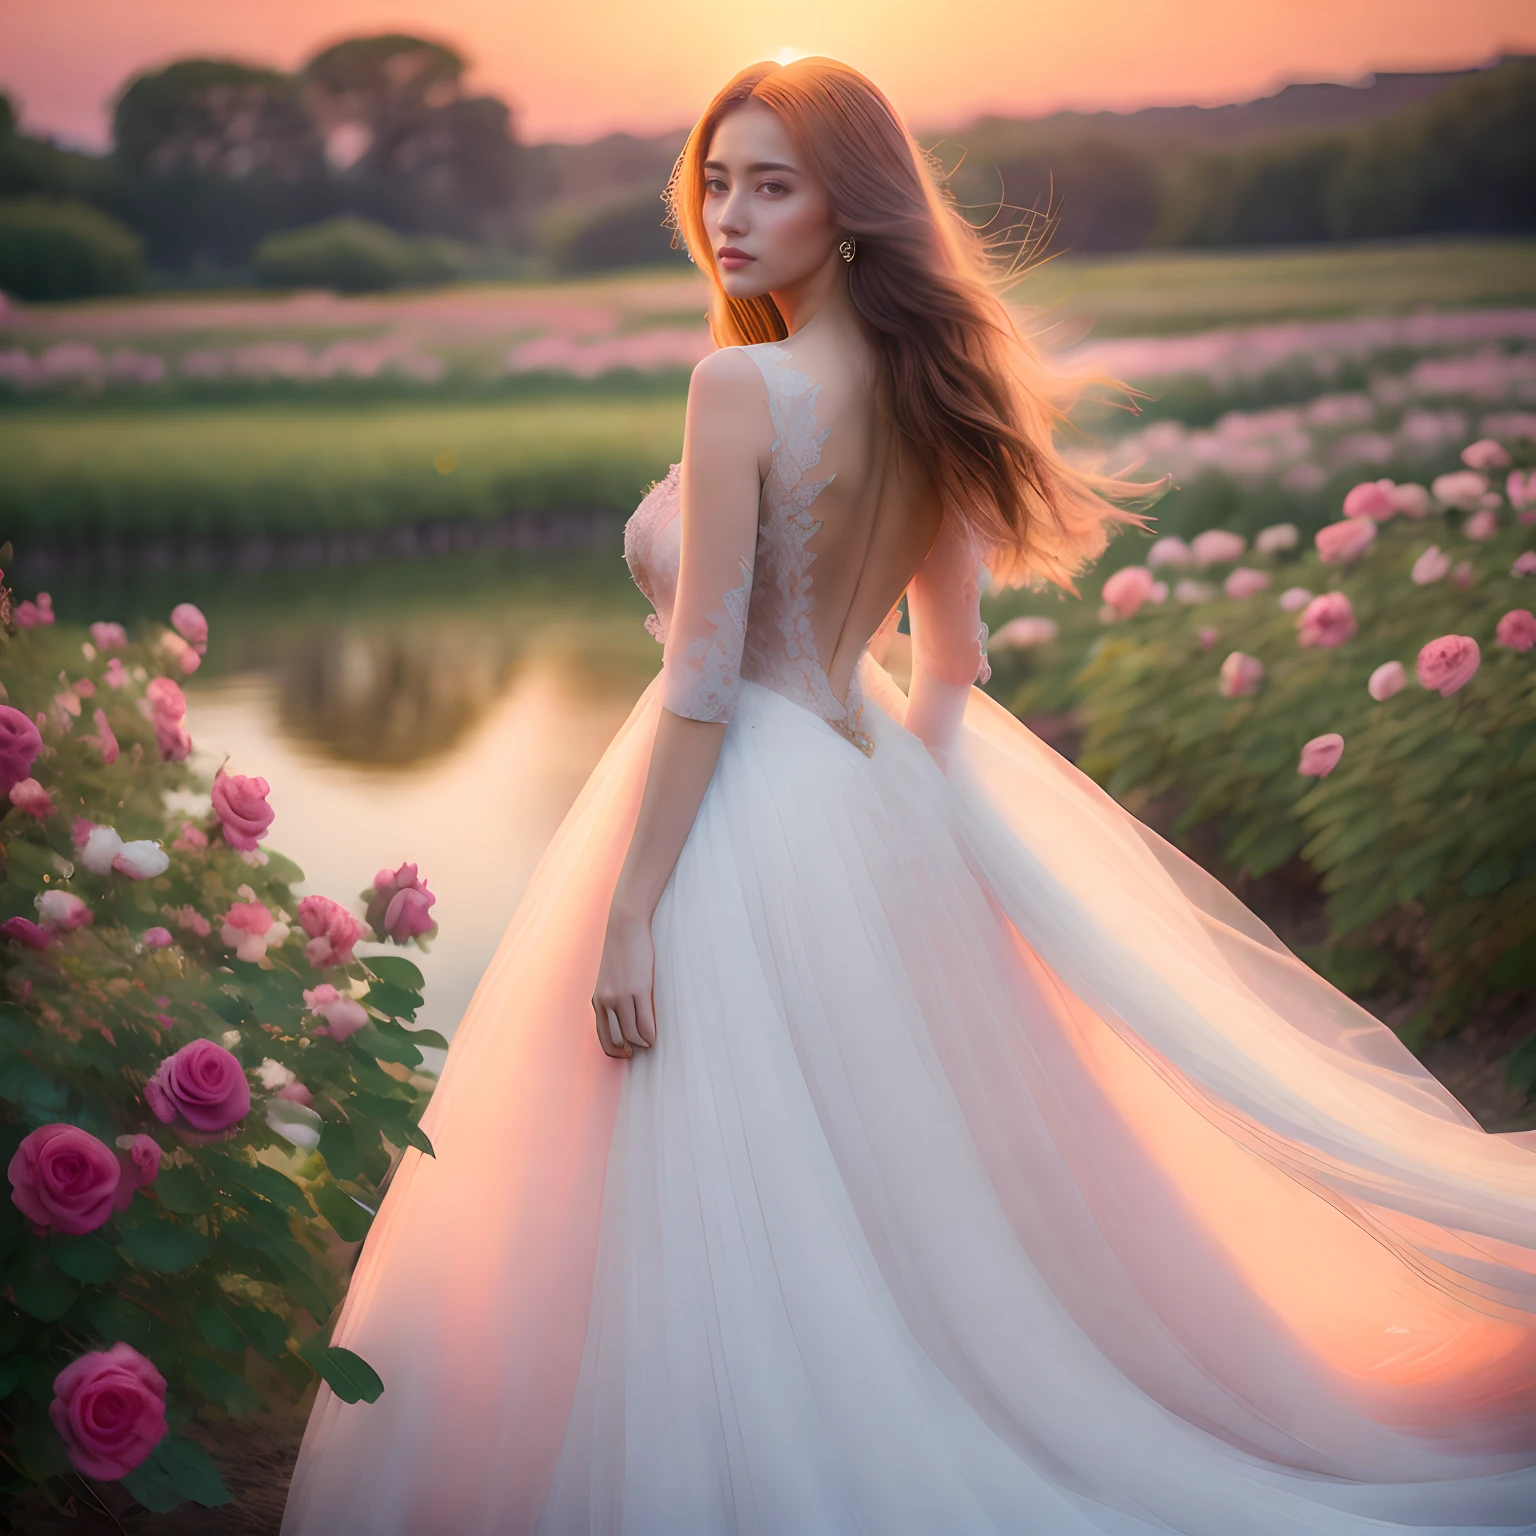 A breathtakingly beautiful woman stands amidst a garden of blooming roses, wearing a stunning gown made entirely of the delicate flowers. Her long hair cascades down her back in soft waves, framing her angelic face and adding to her ethereal appearance. The roses in her dress are perfectly arranged, creating a gradient effect that matches the soft hues of the sunset sky in the background. The woman's serene expression and graceful posture exude a sense of calm and serenity, as though she is one with nature. The atmosphere is magical and enchanting, with a dreamlike quality that transports the viewer to a world of wonder and beauty. The lighting is warm and soft, casting a gentle glow over the scene and highlighting the woman's flawless complexion and the intricate details of her dress. The overall effect is one of pure enchantment and ethereal beauty, leaving the viewer captivated by the sheer magnificence of the scene.